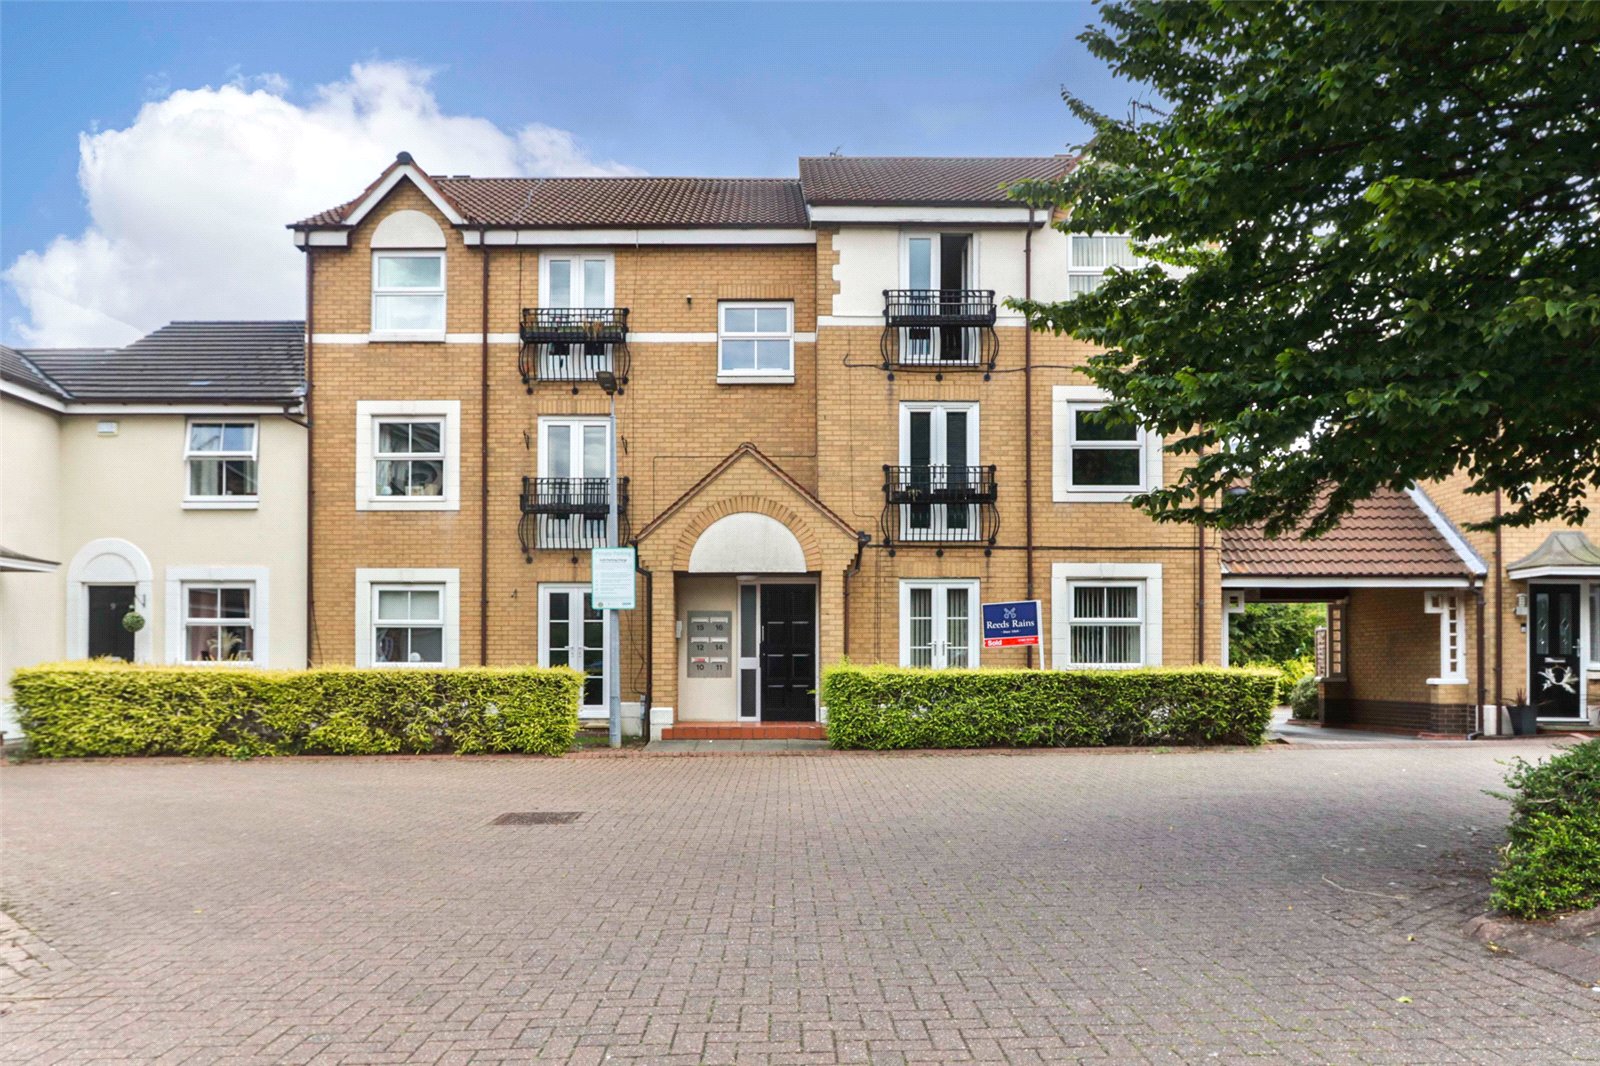 2 bed apartment for sale in Lealholme Court, Howdale Road, HU8 